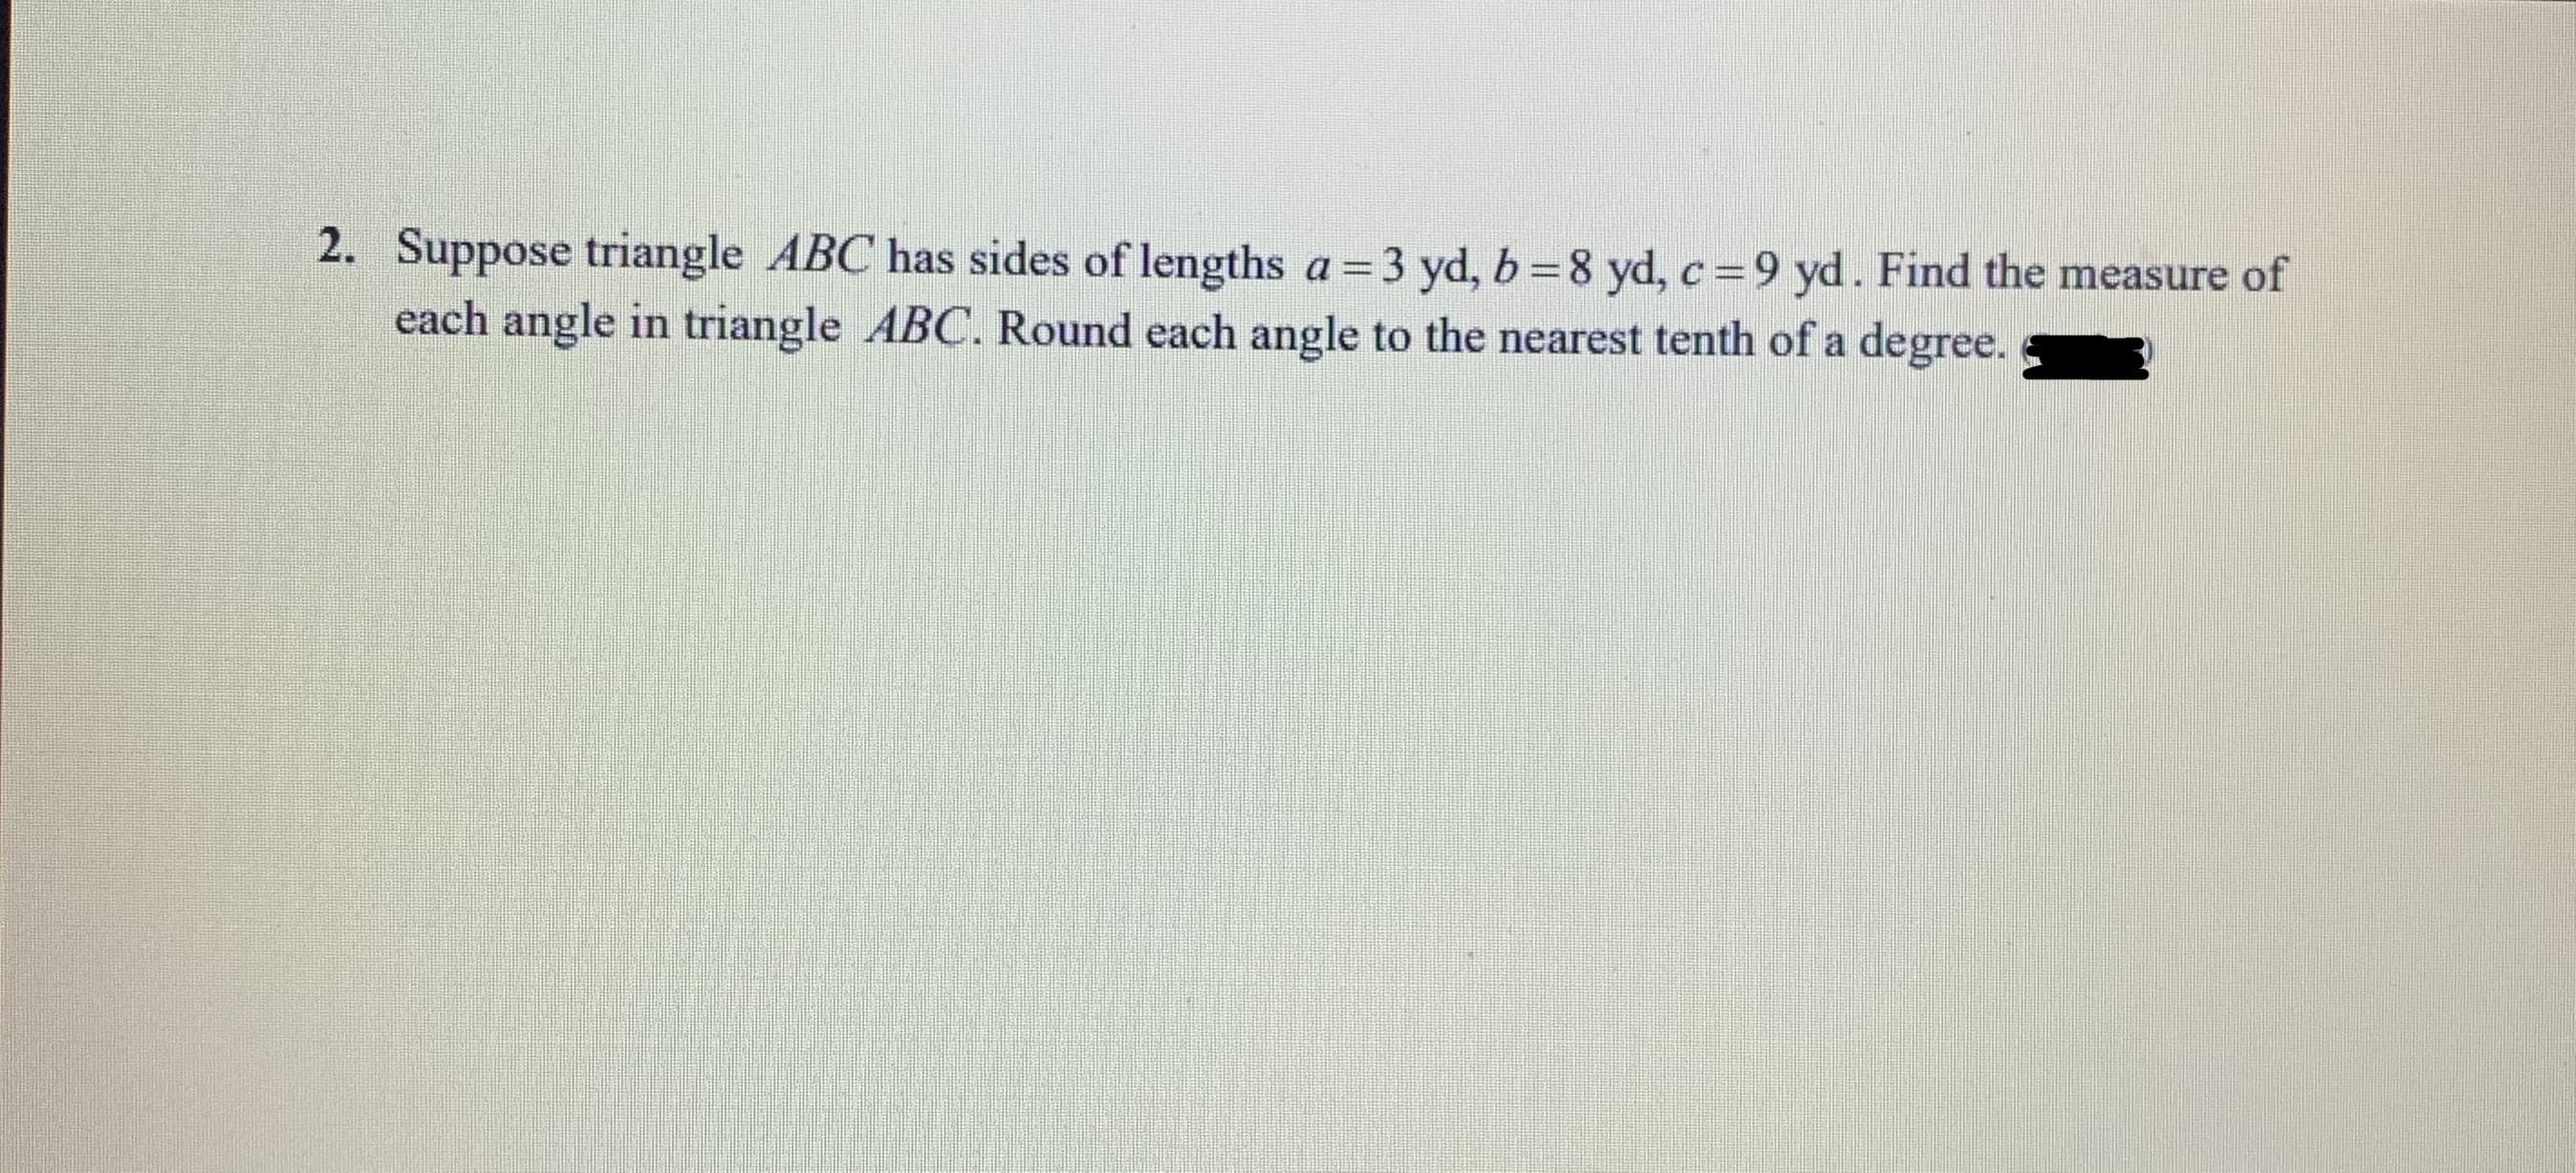 2. Suppose triangle ABC has sides of lengths a=3 yd, b =8 yd, c=9 yd. Find the measure of
each angle in triangle ABC. Round each angle to the nearest tenth of a degree.
